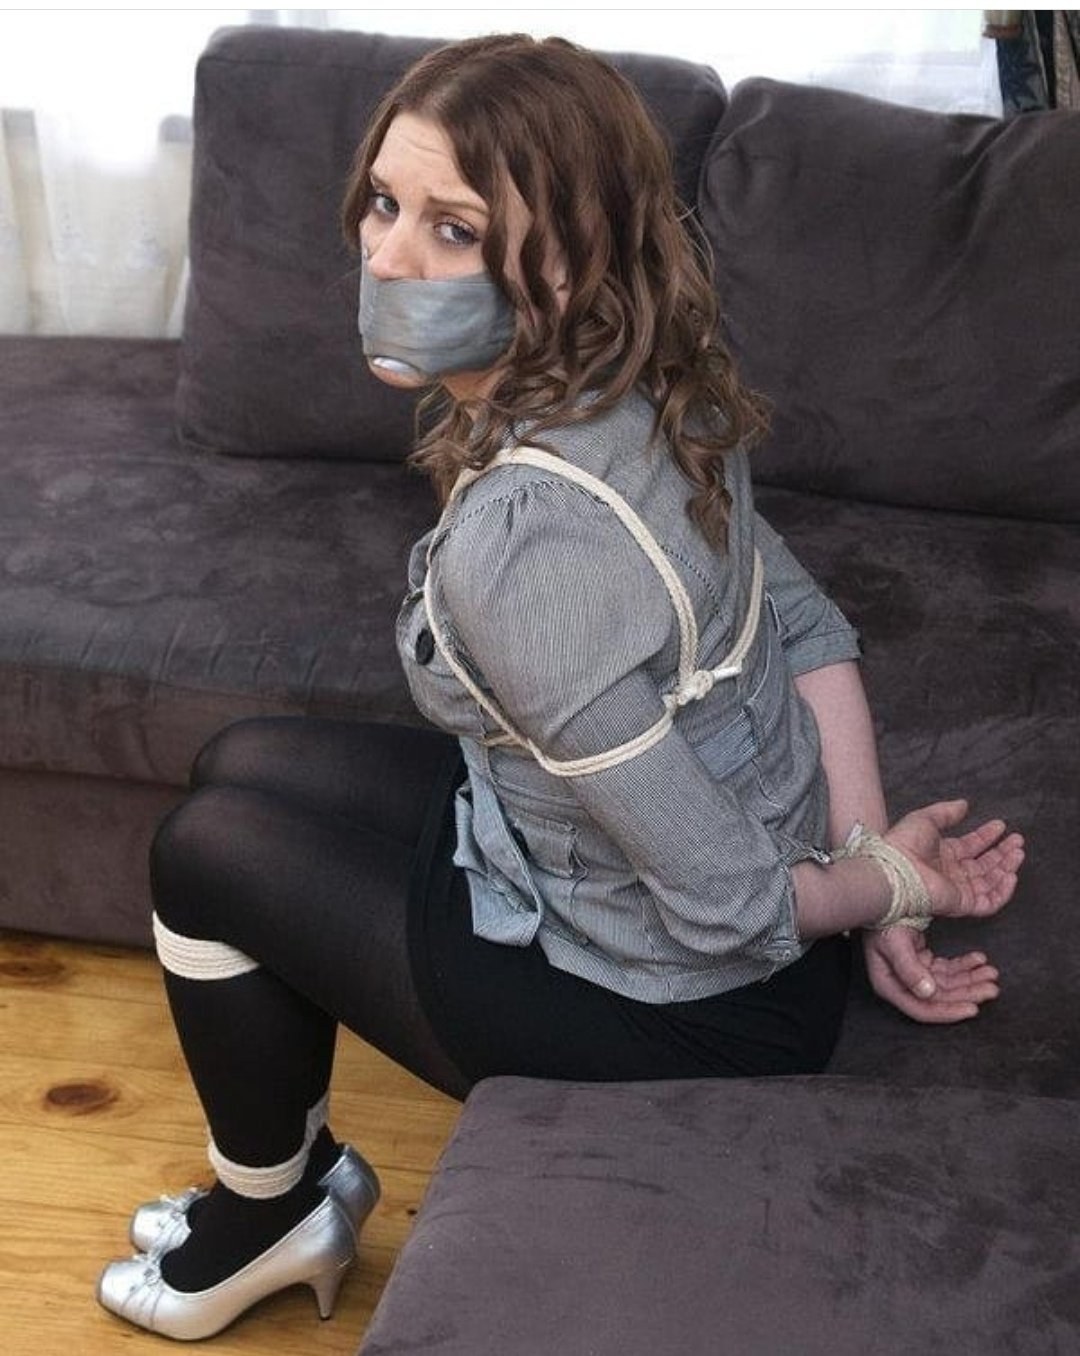 Tied And Gagged With Tape 18